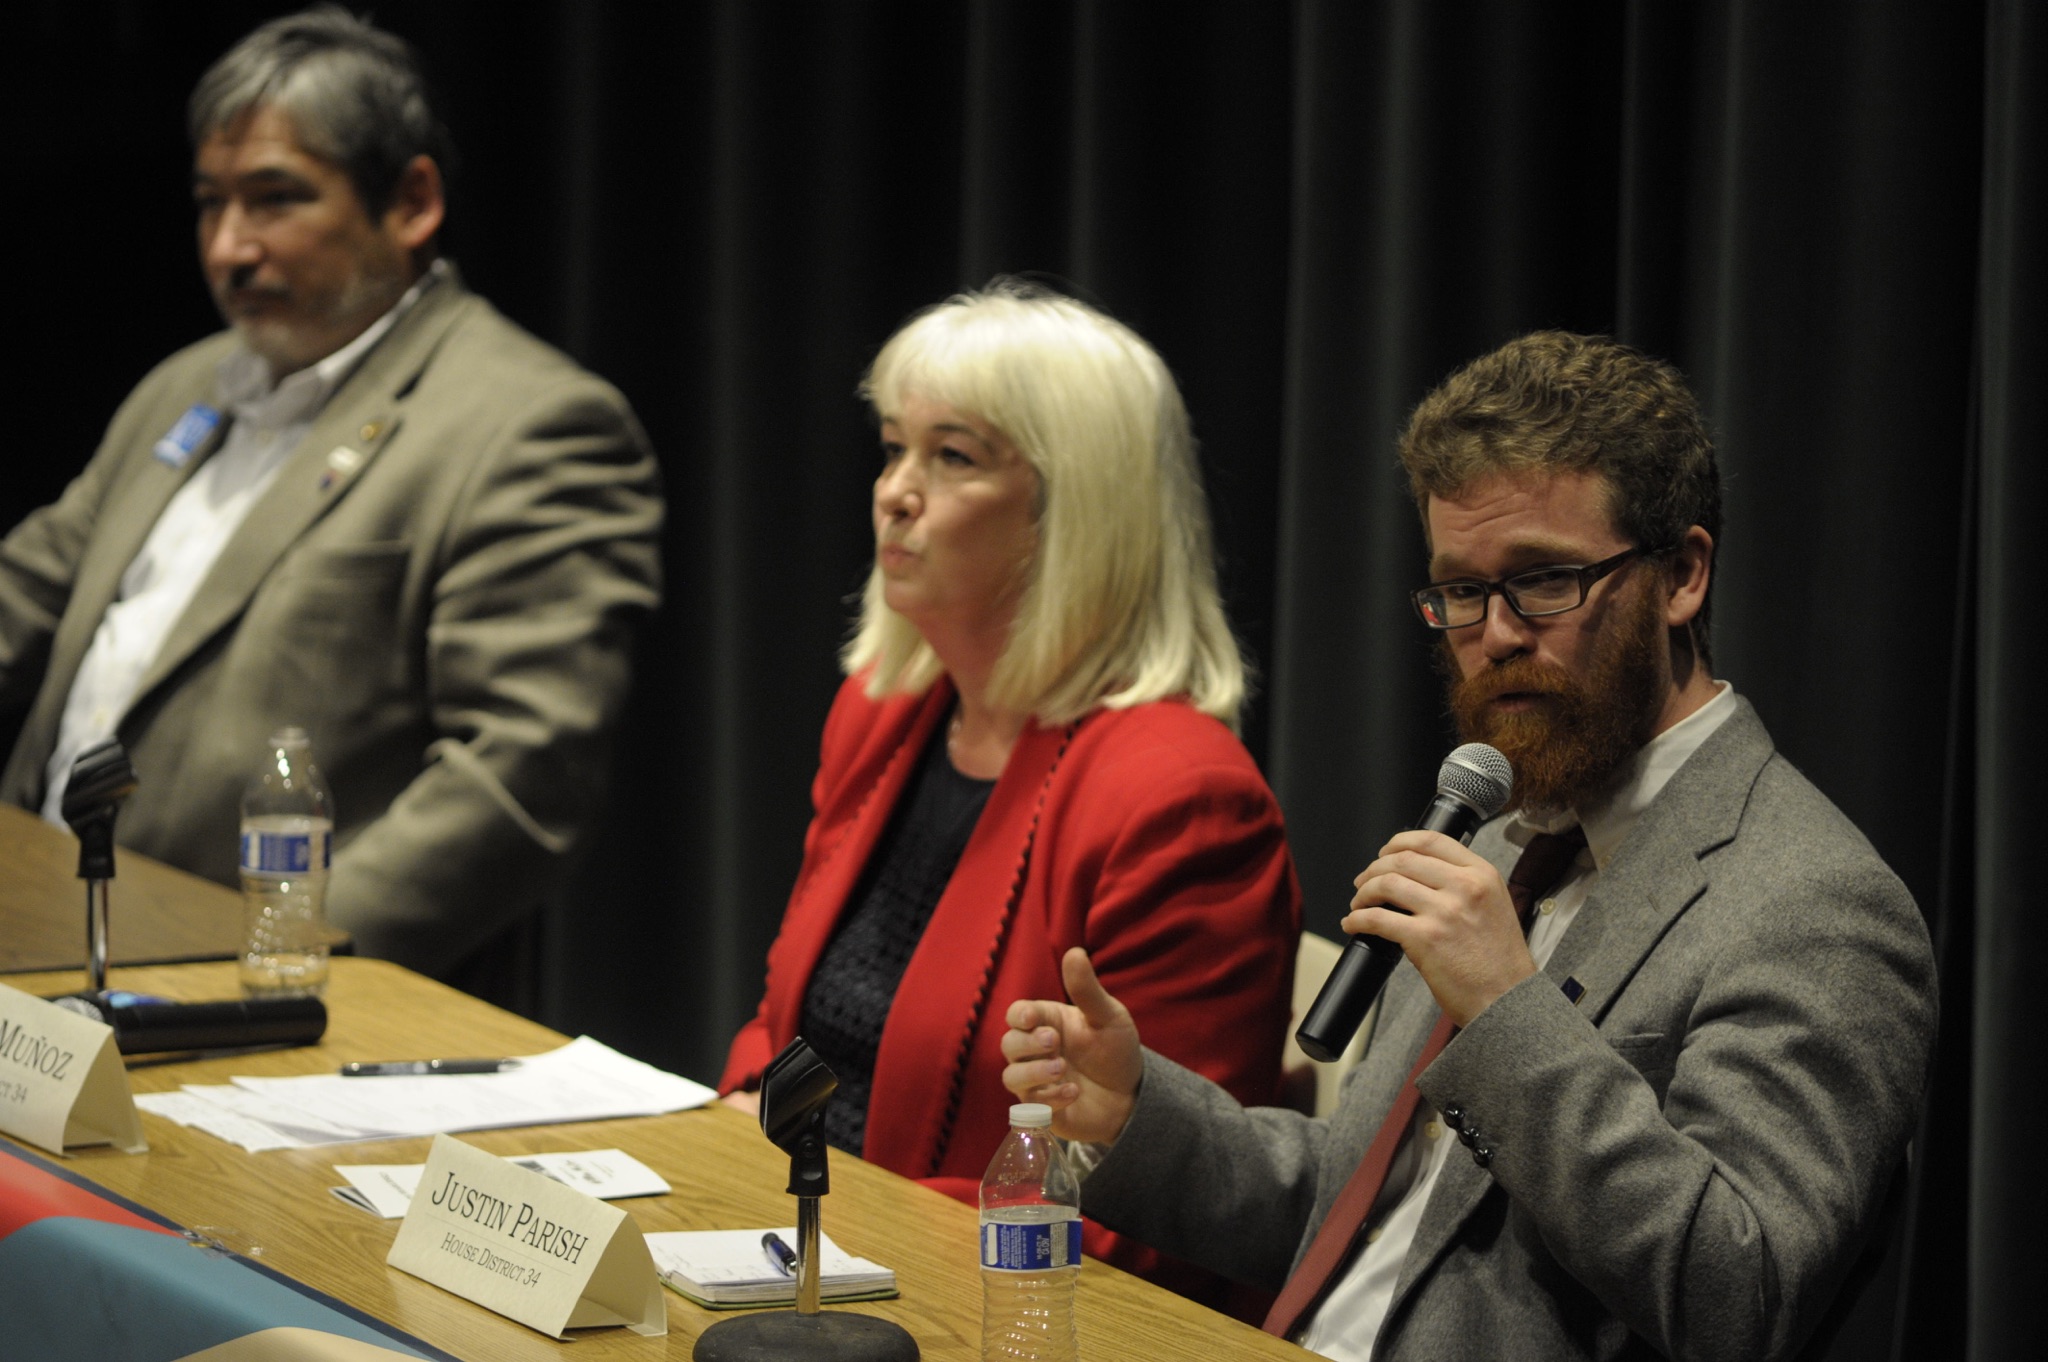 Democrat Justin Parish, candidate for House District 34, speaks during Thursday night's Juneau votes forum at the University of Alaska Southeast. At left, his opponent, incumbent Rep. Cathy Muñoz, R-Juneau, waits to rebut his comments. At far left is Rep. Sam Kito III, D-Juneau, who is unopposed for re-election to House District 33.